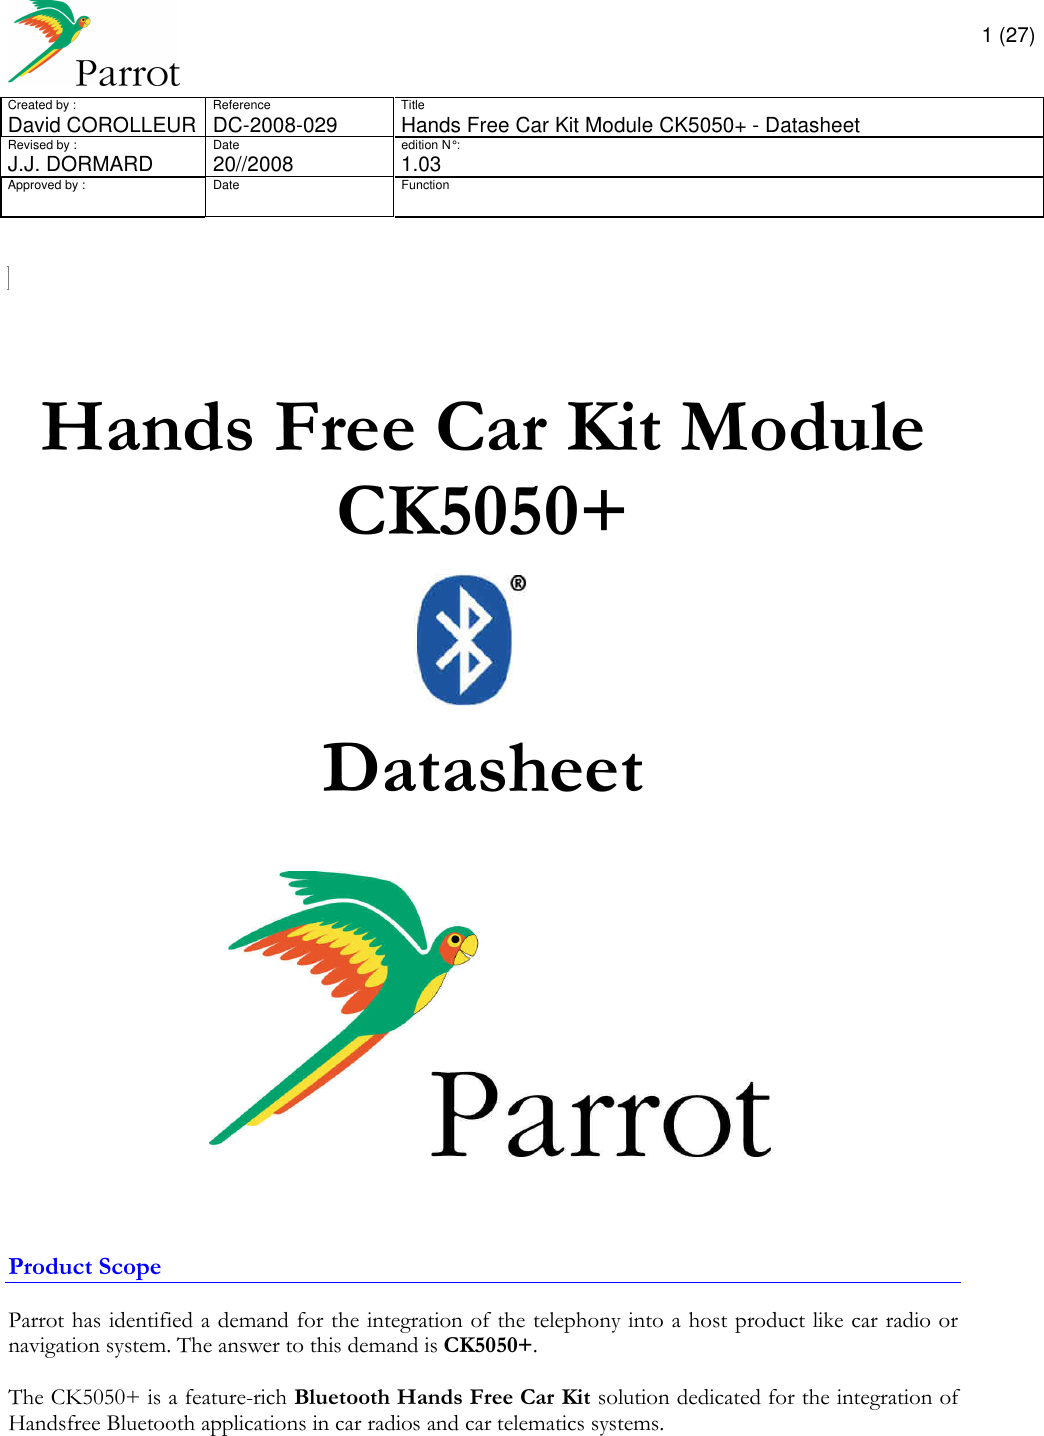       1 (27) Created by :  Reference  Title David COROLLEUR  DC-2008-029  Hands Free Car Kit Module CK5050+ - Datasheet  Revised by :  Date  edition N° :  J.J. DORMARD  20//2008   1.03 Approved by :  Date  Function                       Hands Free Car Kit Module CK5050+    Datasheet       Product Scope  Parrot has identified a demand for the integration of the telephony into a host product like car radio or navigation system. The answer to this demand is CK5050+.  The CK5050+ is a feature-rich Bluetooth Hands Free Car Kit solution dedicated for the integration of Handsfree Bluetooth applications in car radios and car telematics systems.       